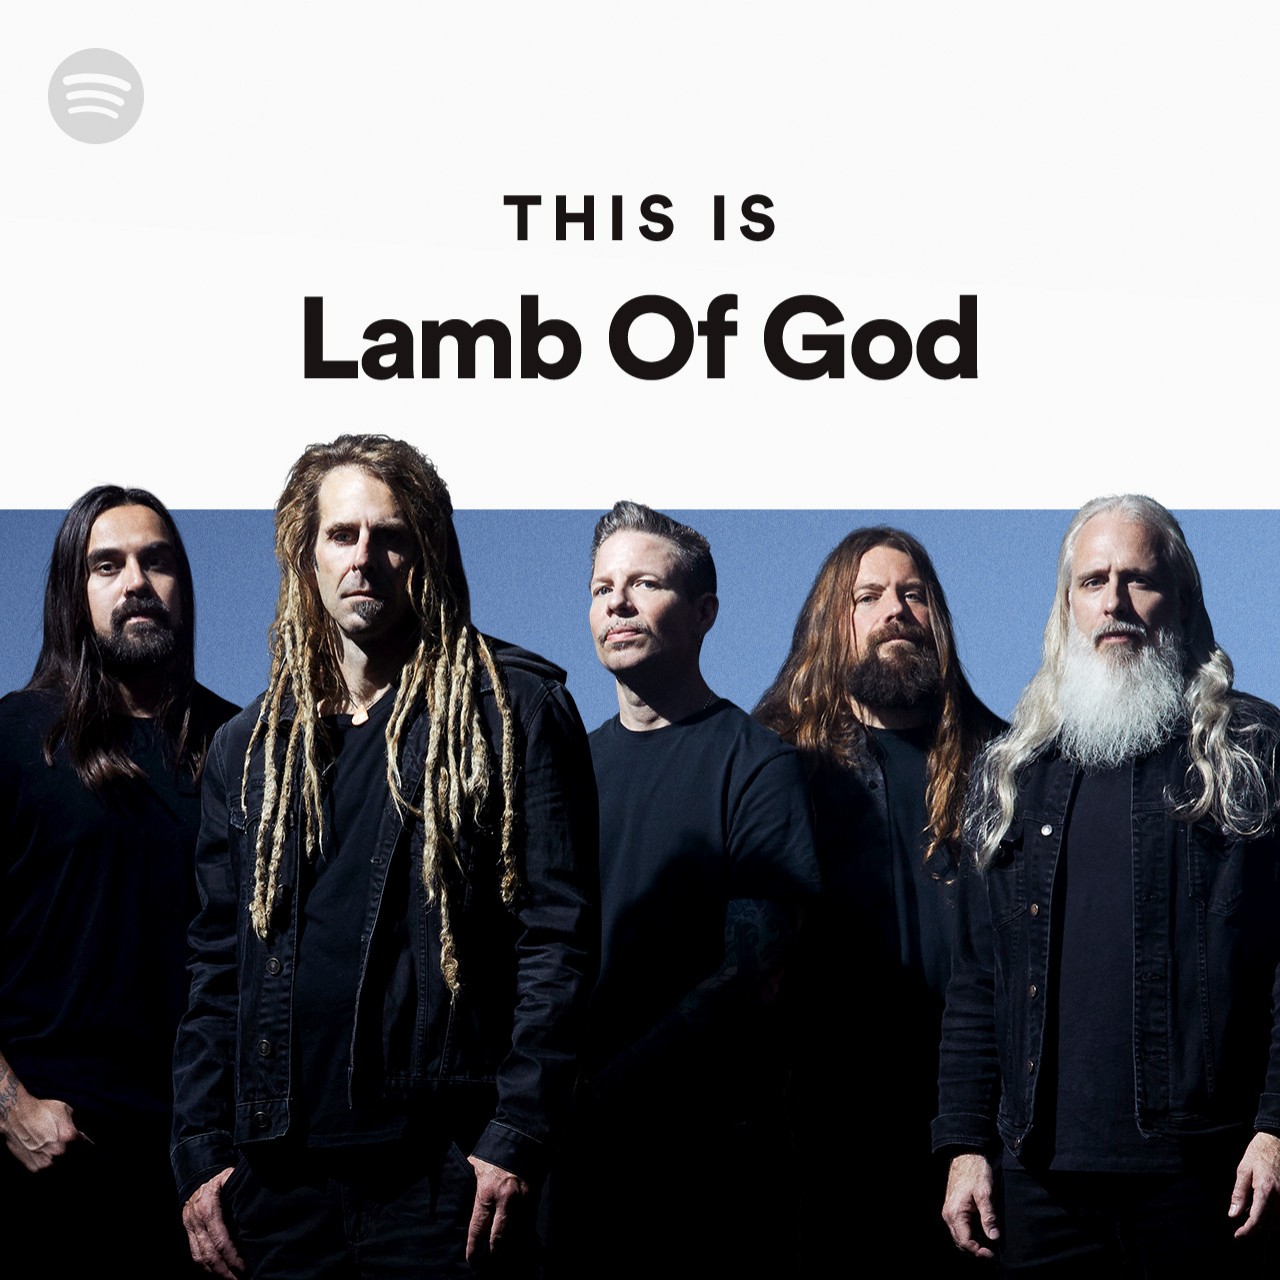 This Is Lamb of God